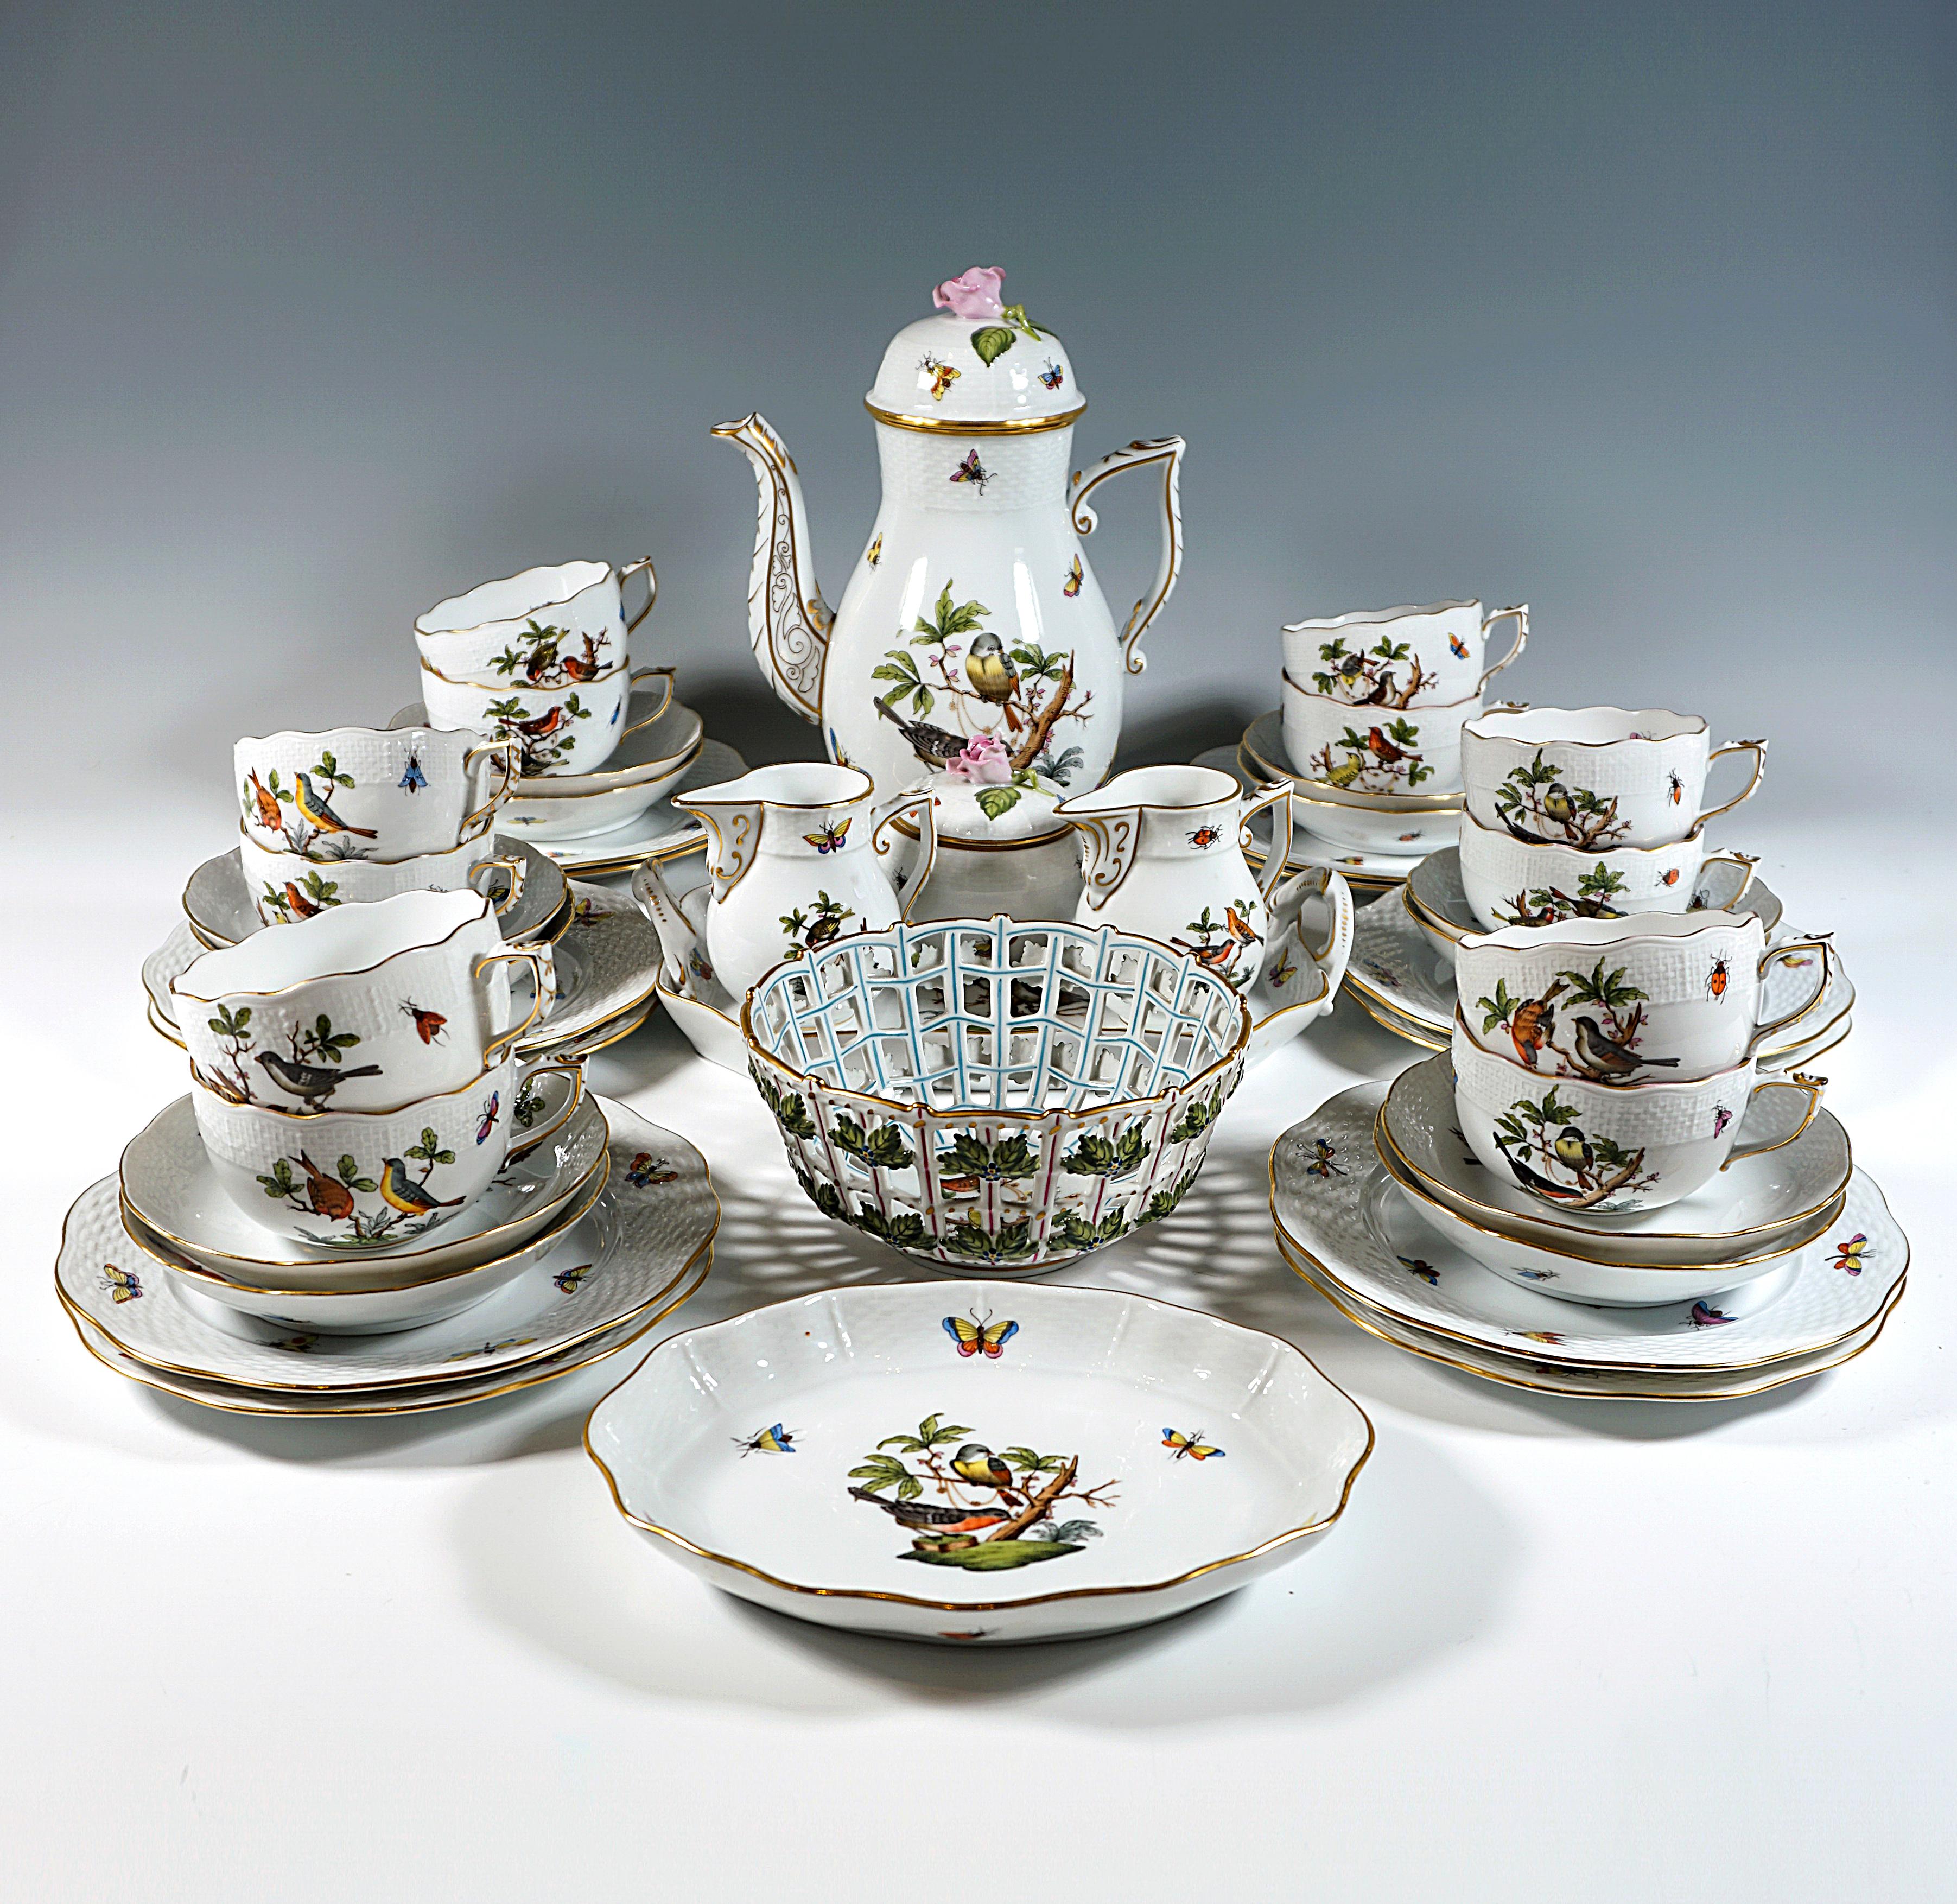 Herend service consisting of 43 parts: 1 lidded coffee pot, 2 milk jugs, 1 lidded sugar bowl, 12 cups, 12 saucers, 12 dessert plates, 1 serving 
tray square with handles, 1 serving tray oval, 1 breakthrough basket.
Shape: Osier / basket weave
Decor: